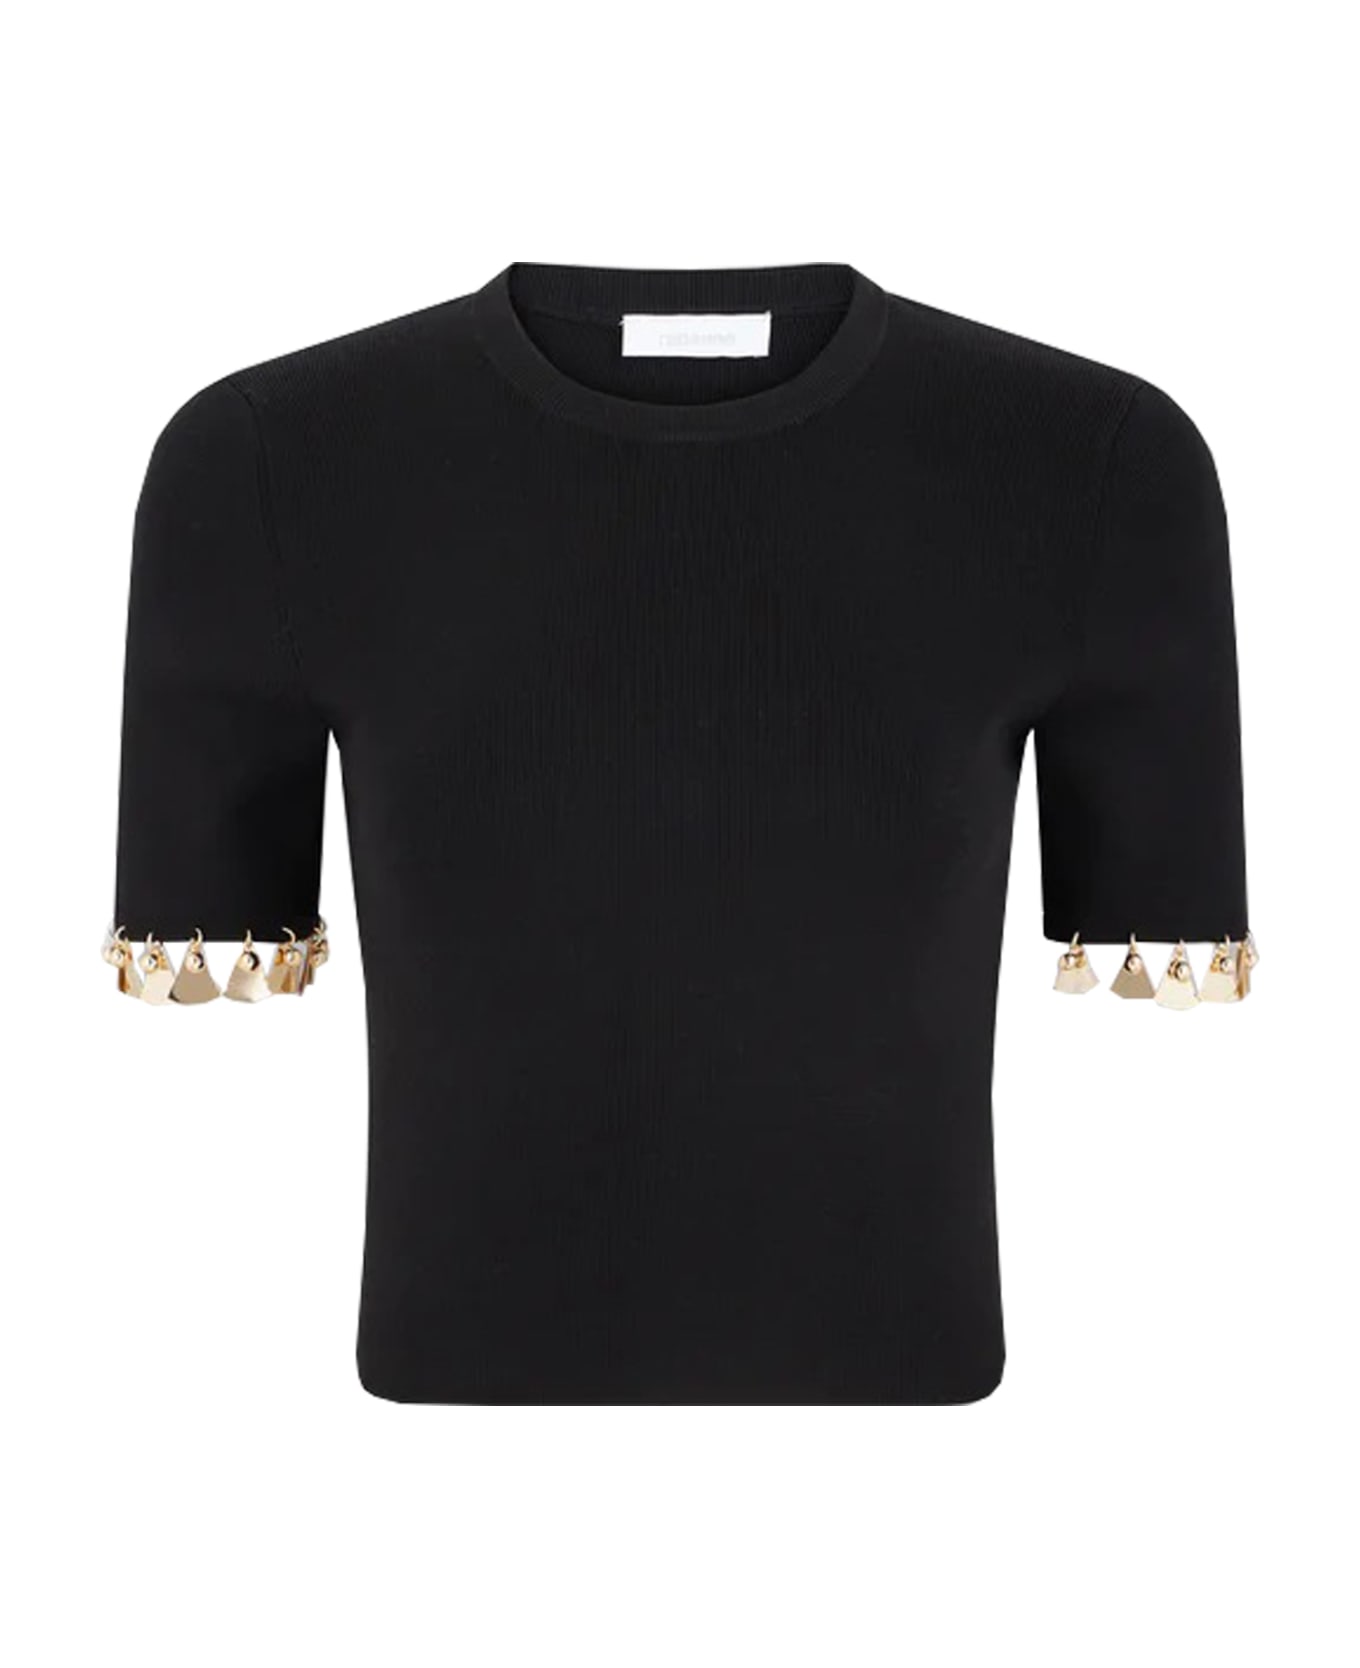 Paco Rabanne Embellished Knit Cropped Top - Black Tシャツ